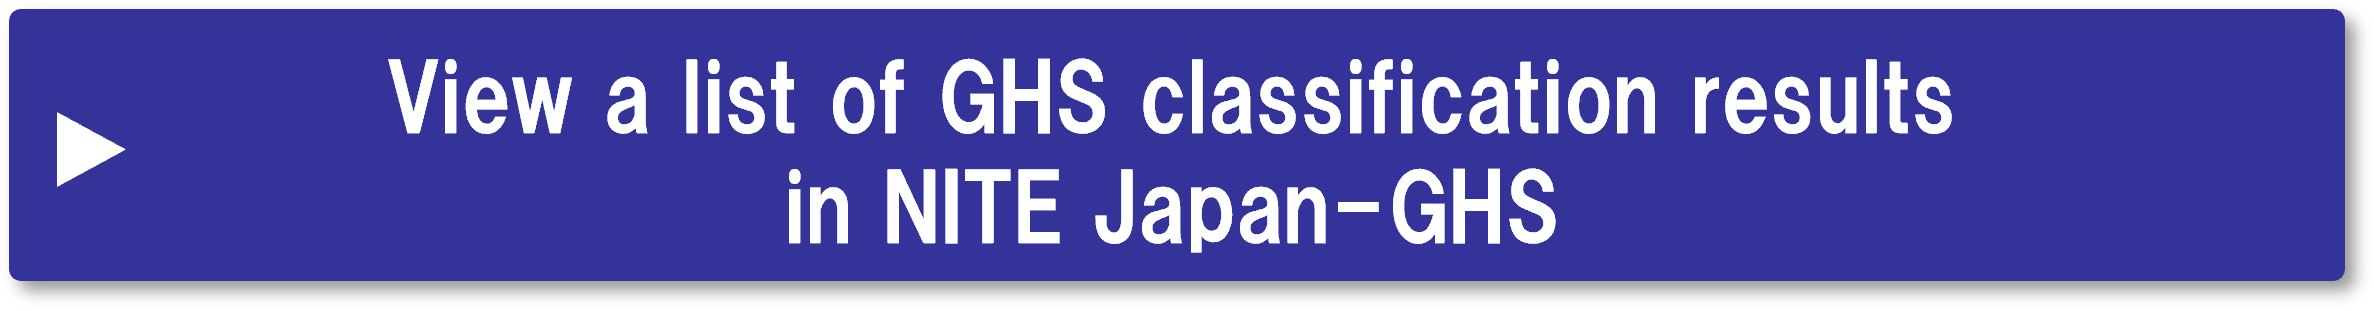 View a list of GHS classification results in NITE Japan-GHS